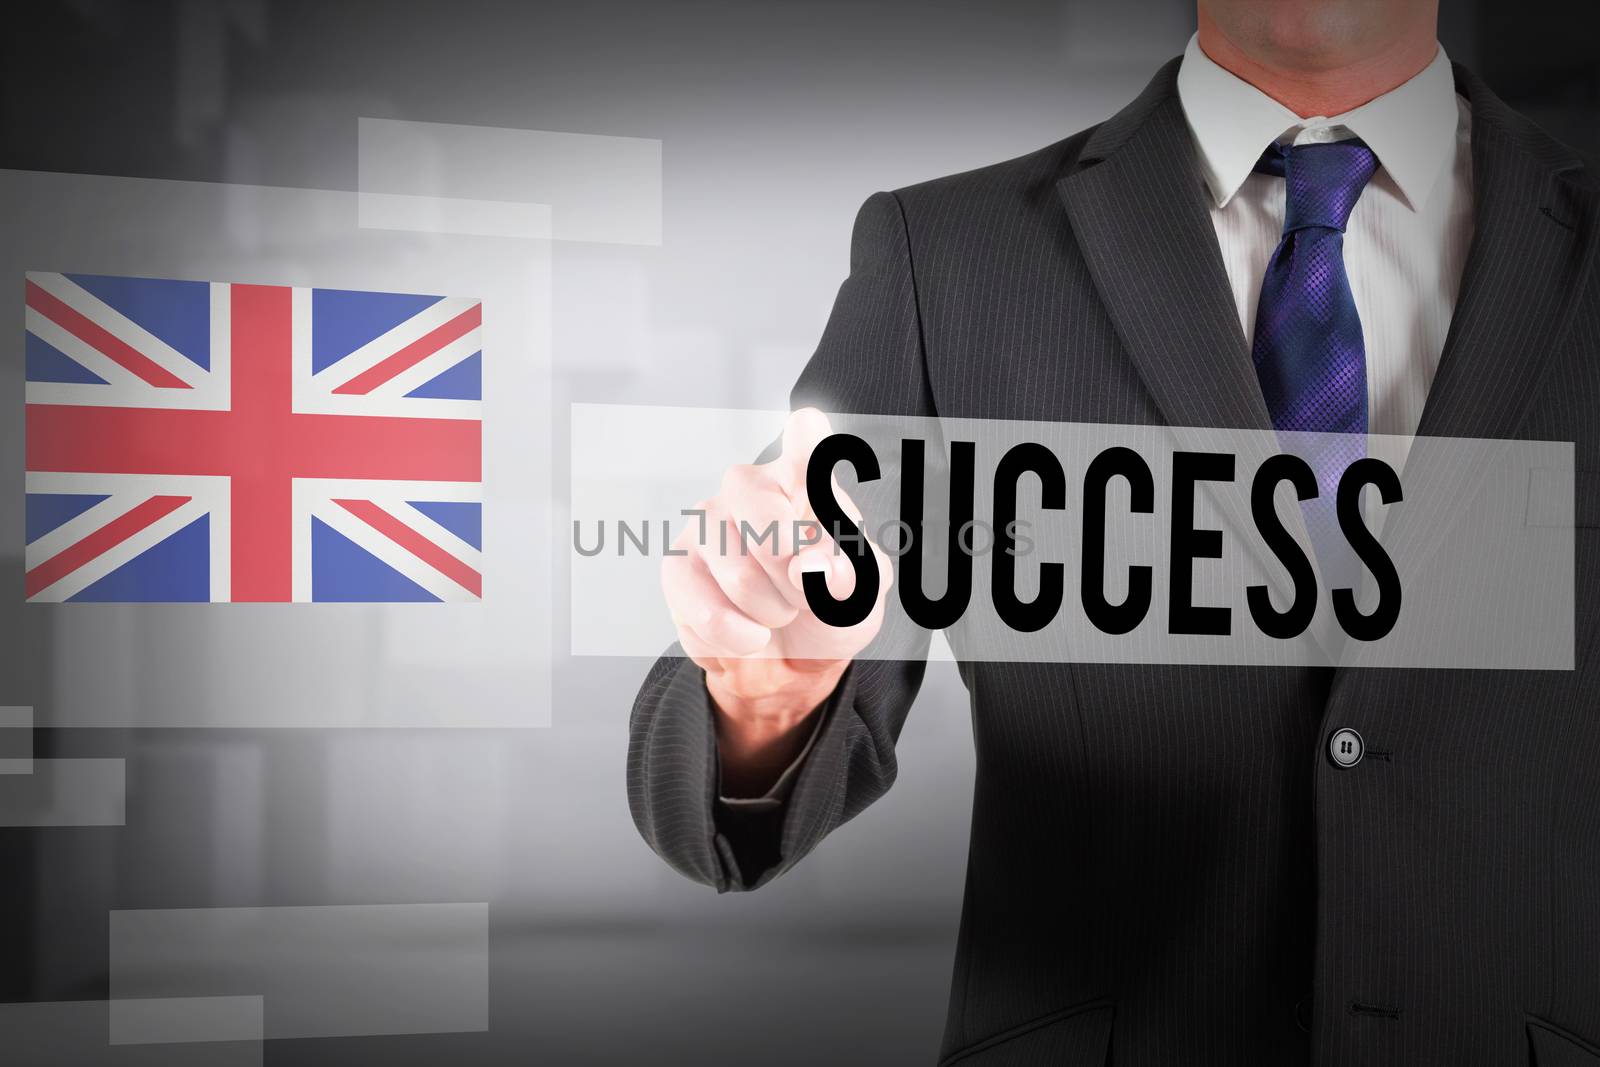 The word success and businessman in suit pointing finger against abstract white room